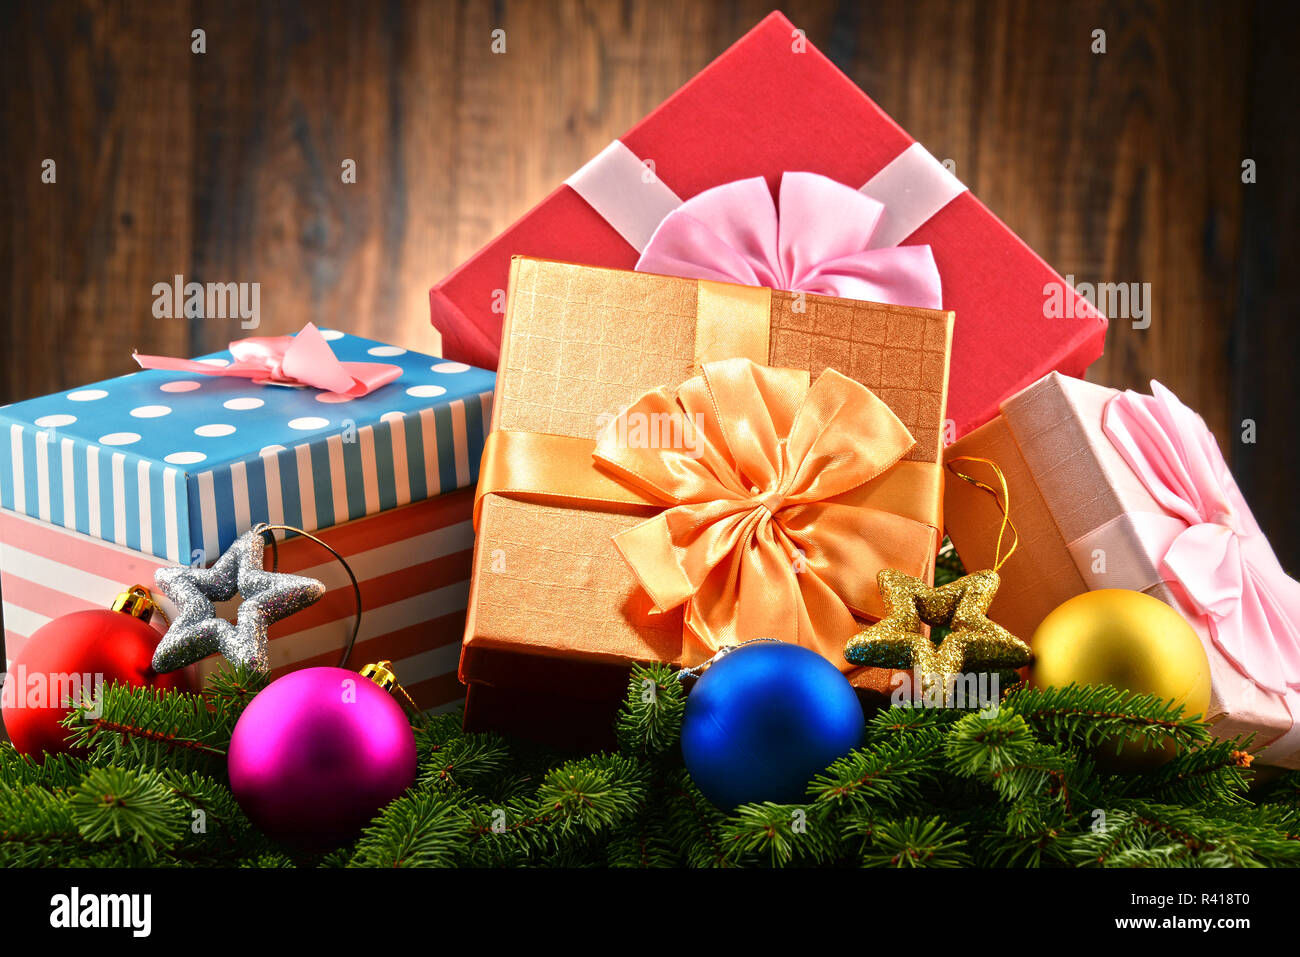 Colorful gift boxes and christmas tree Stock Photo